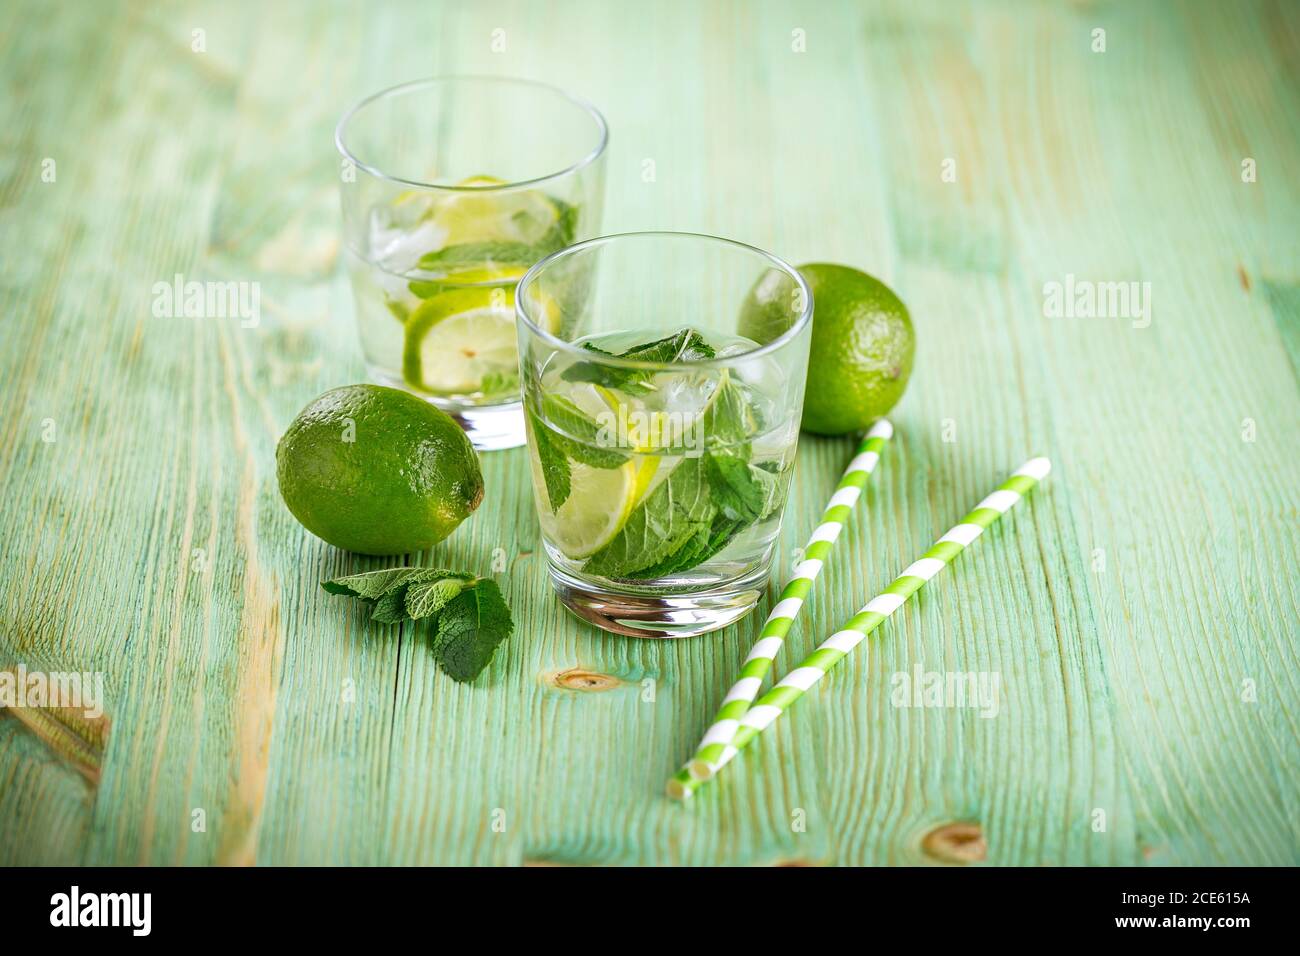 Lemonade drink on a wooden background Stock Photo